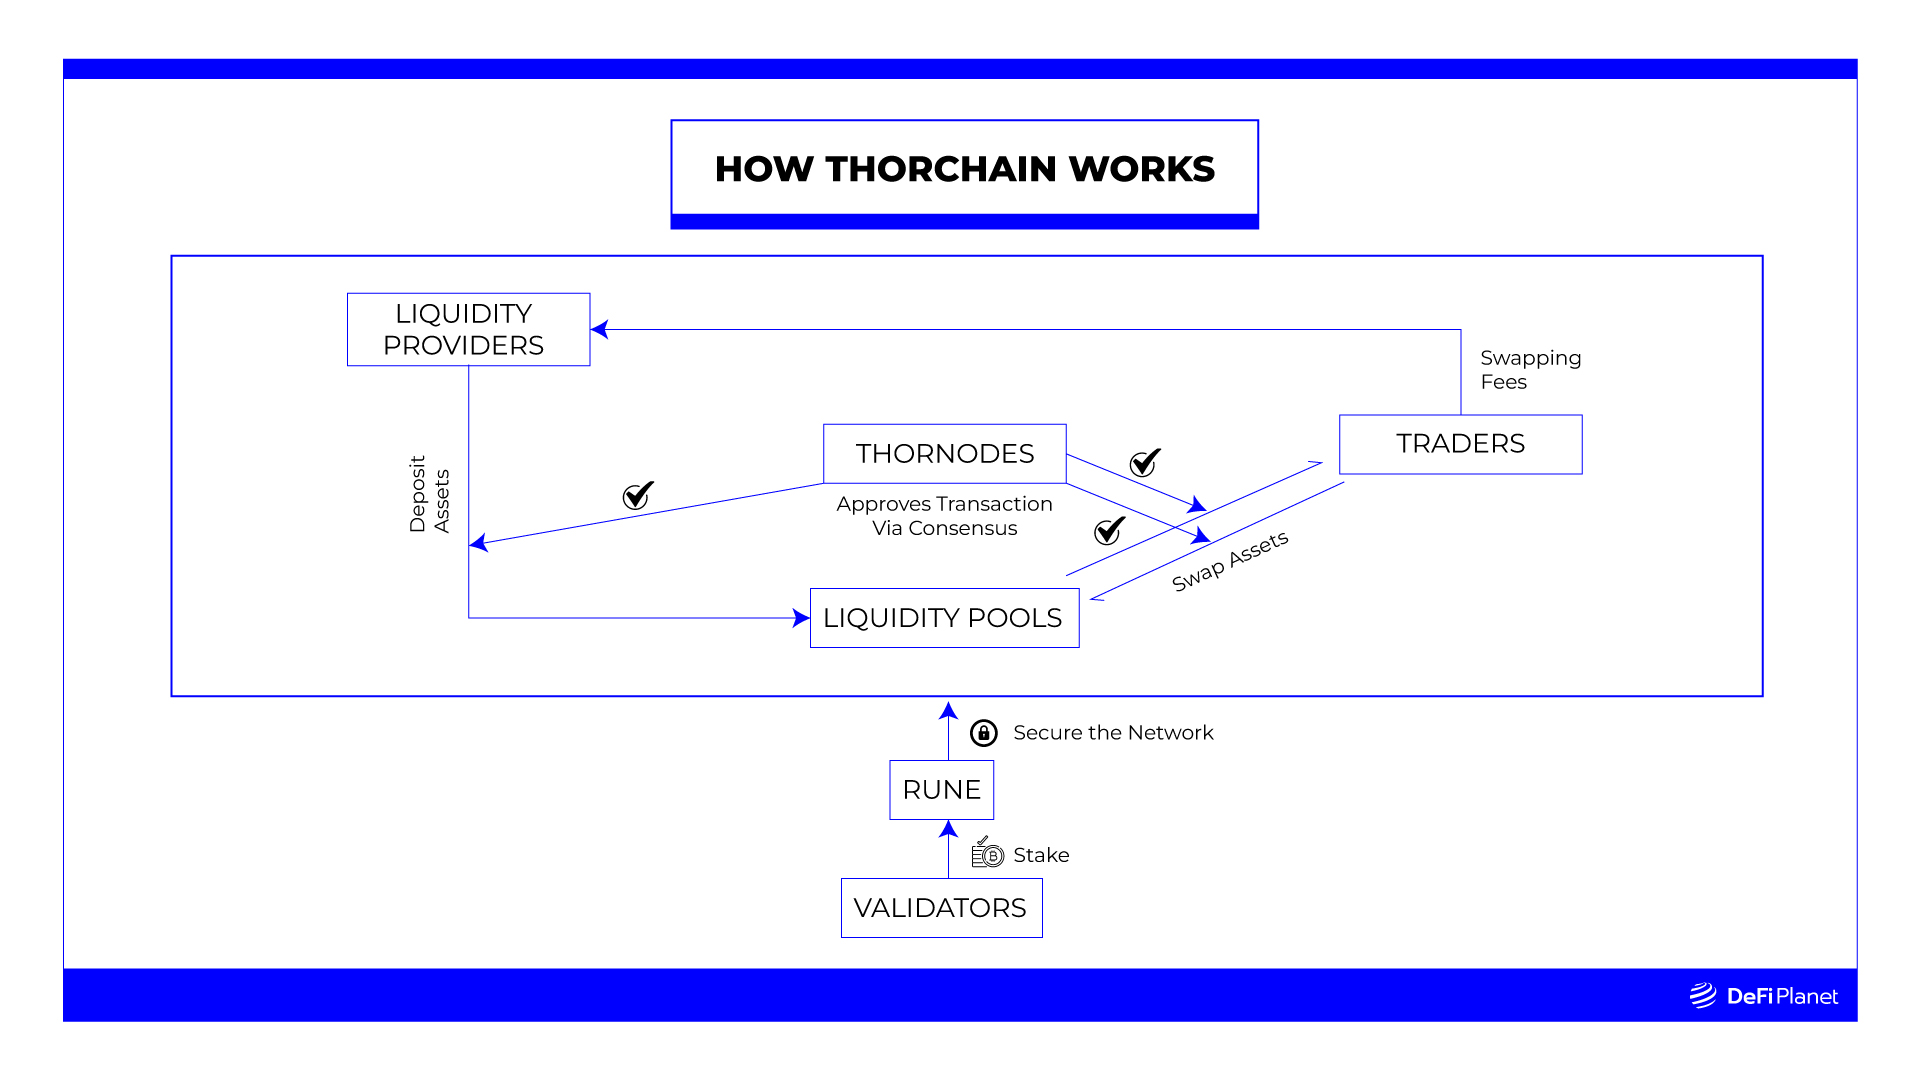 How does THORChain work?